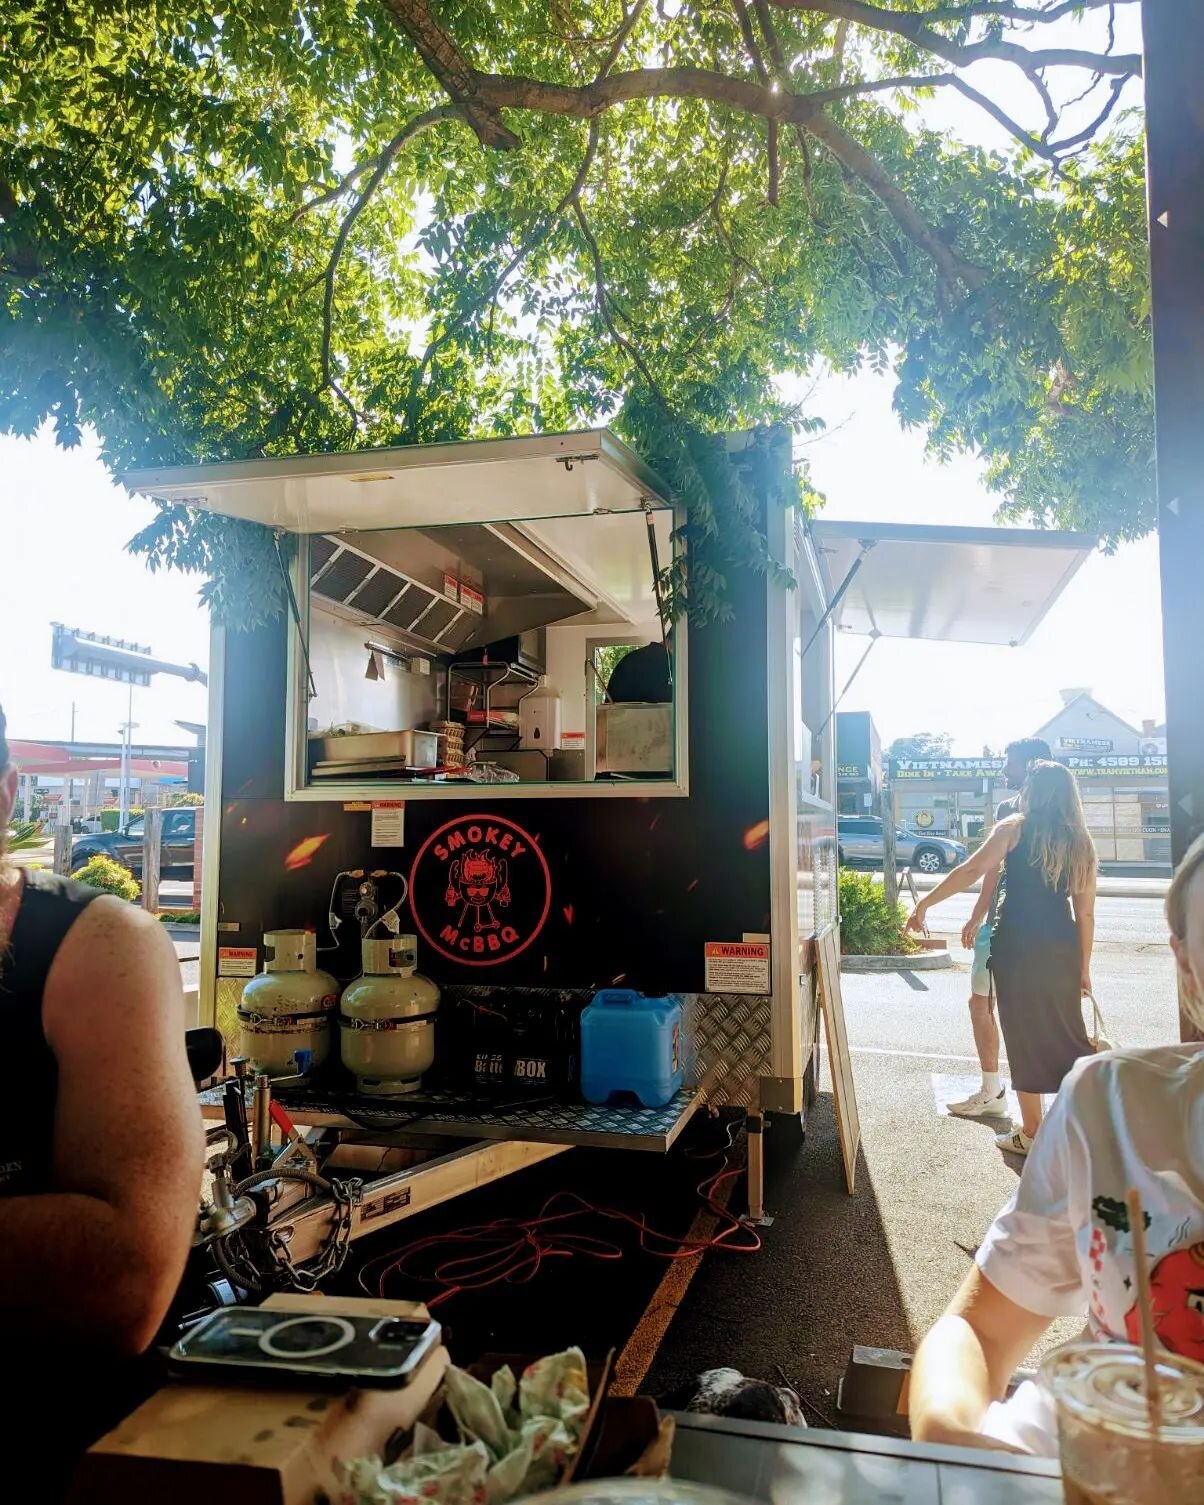 By popular demand, our purveyor of brekky tacos, burritos and other such fine things, Smokey McBBQ, is back again this Saturday, from 7...

@smokeymcbbq